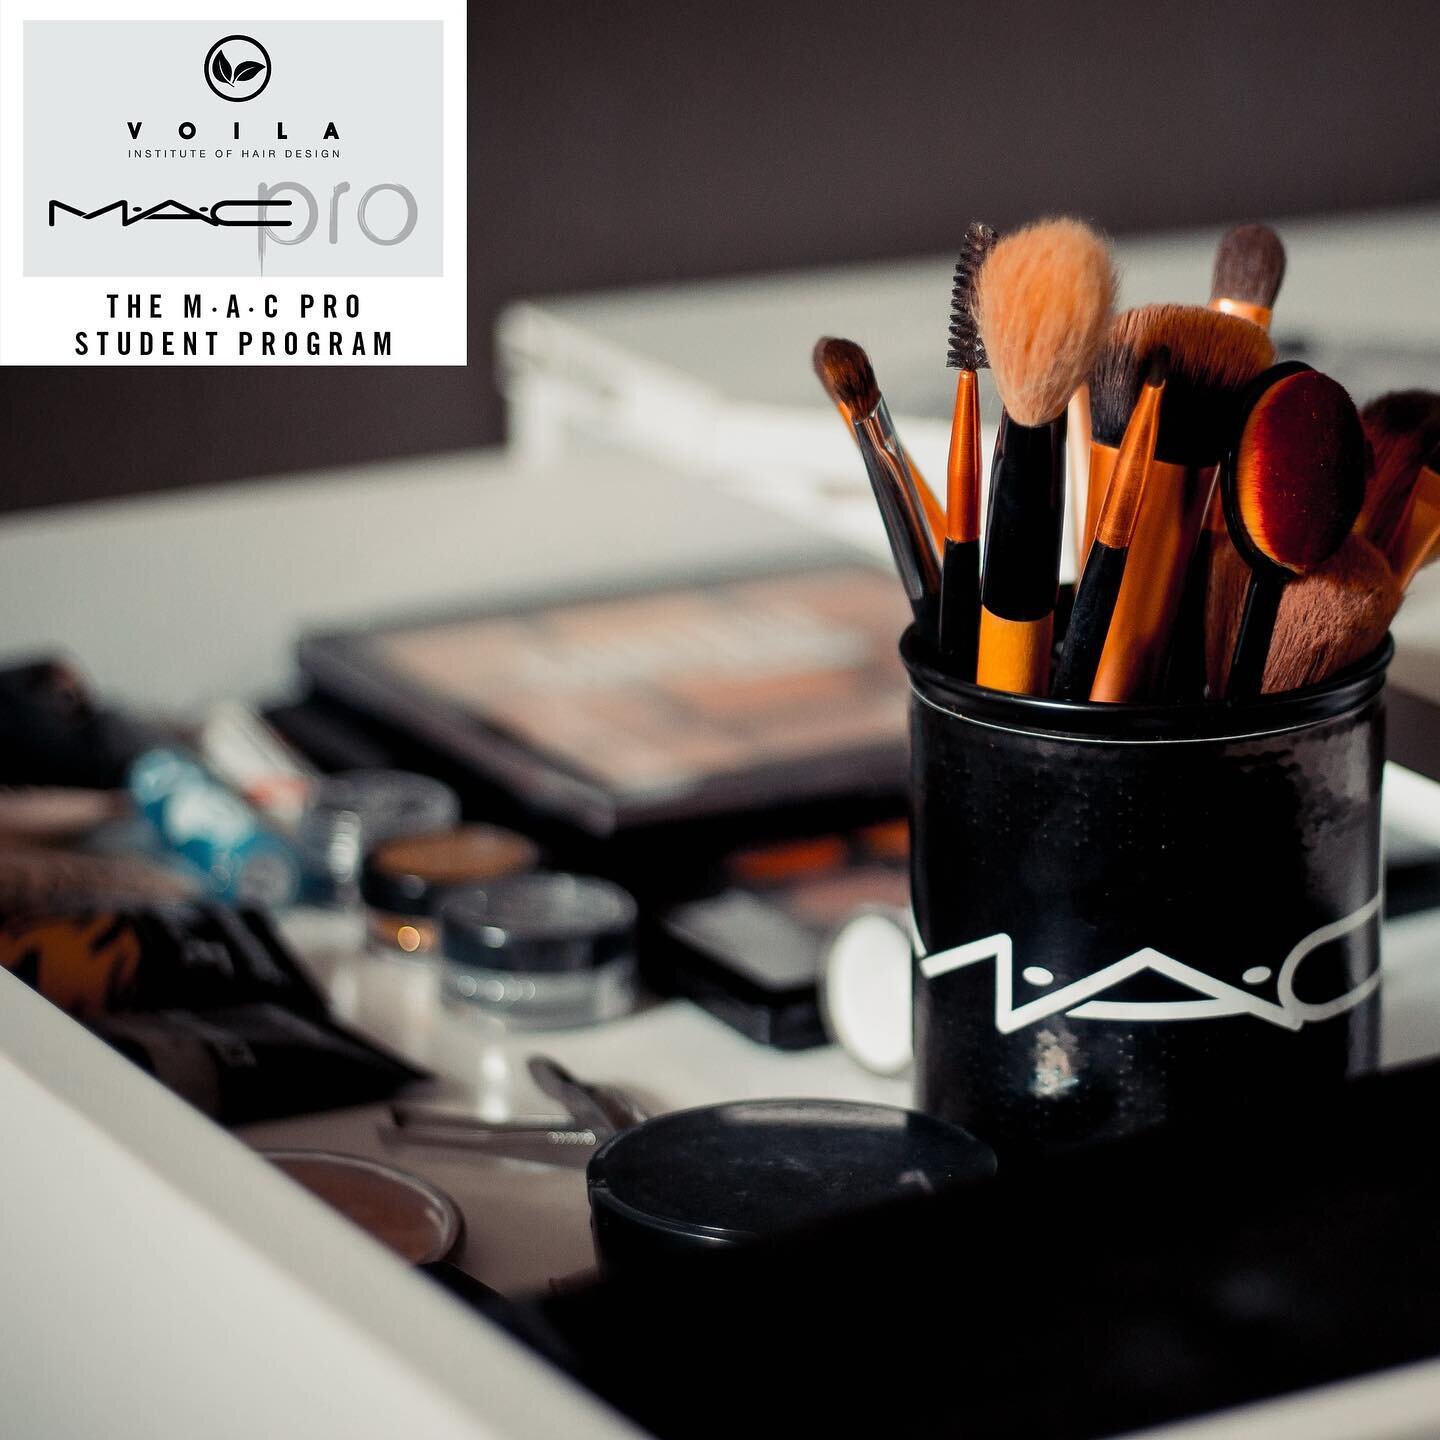 Sharpen those makeup skills with Voila Institute&rsquo;s Makeup Certification Program!!

Being a participating school in the M.A.C pro student program, we aim to provide students with the latest tools and techniques to learn those trending looks. 

I